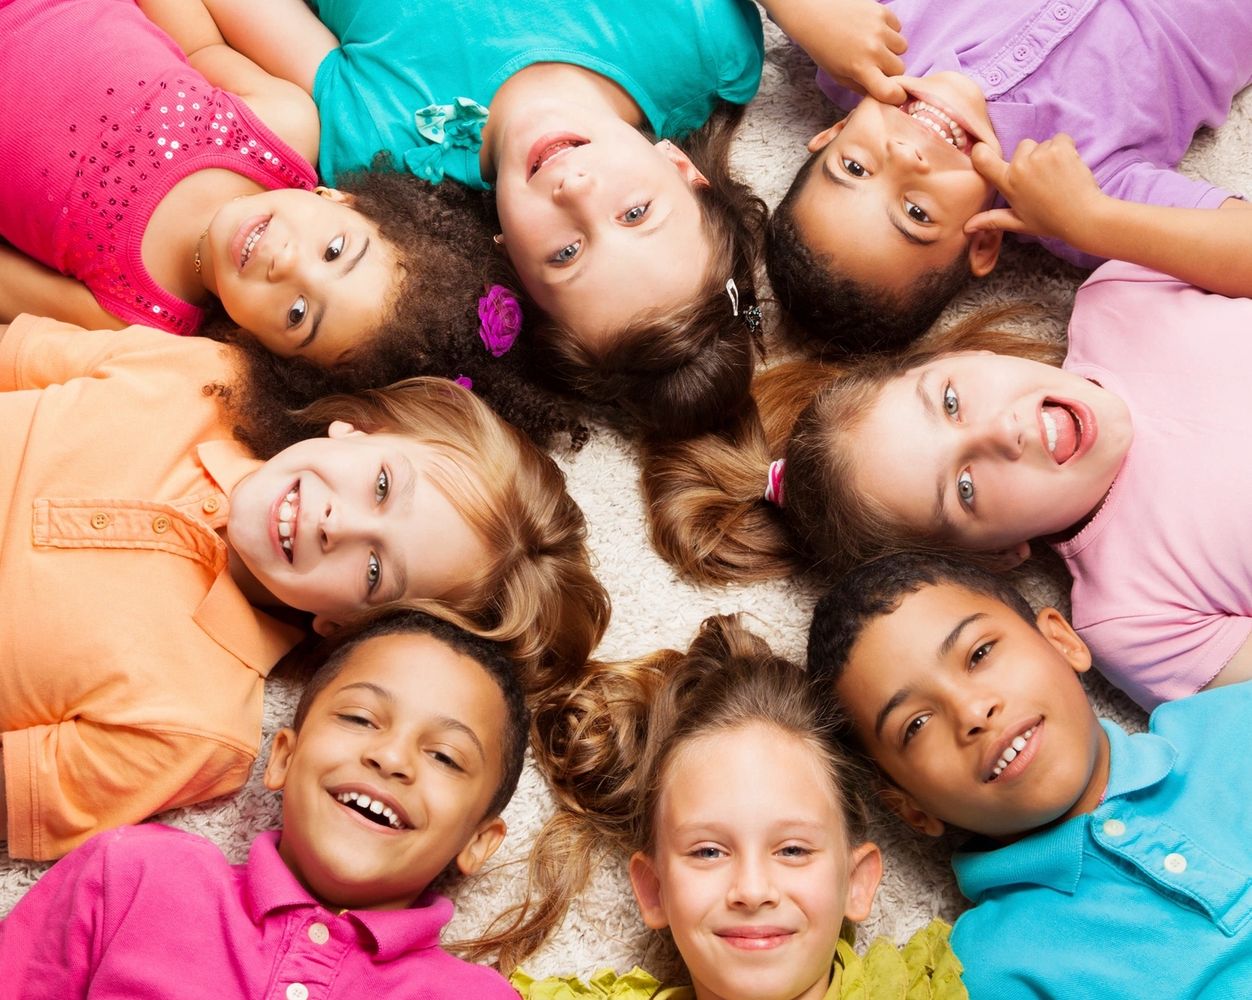 image of children from different backgrounds